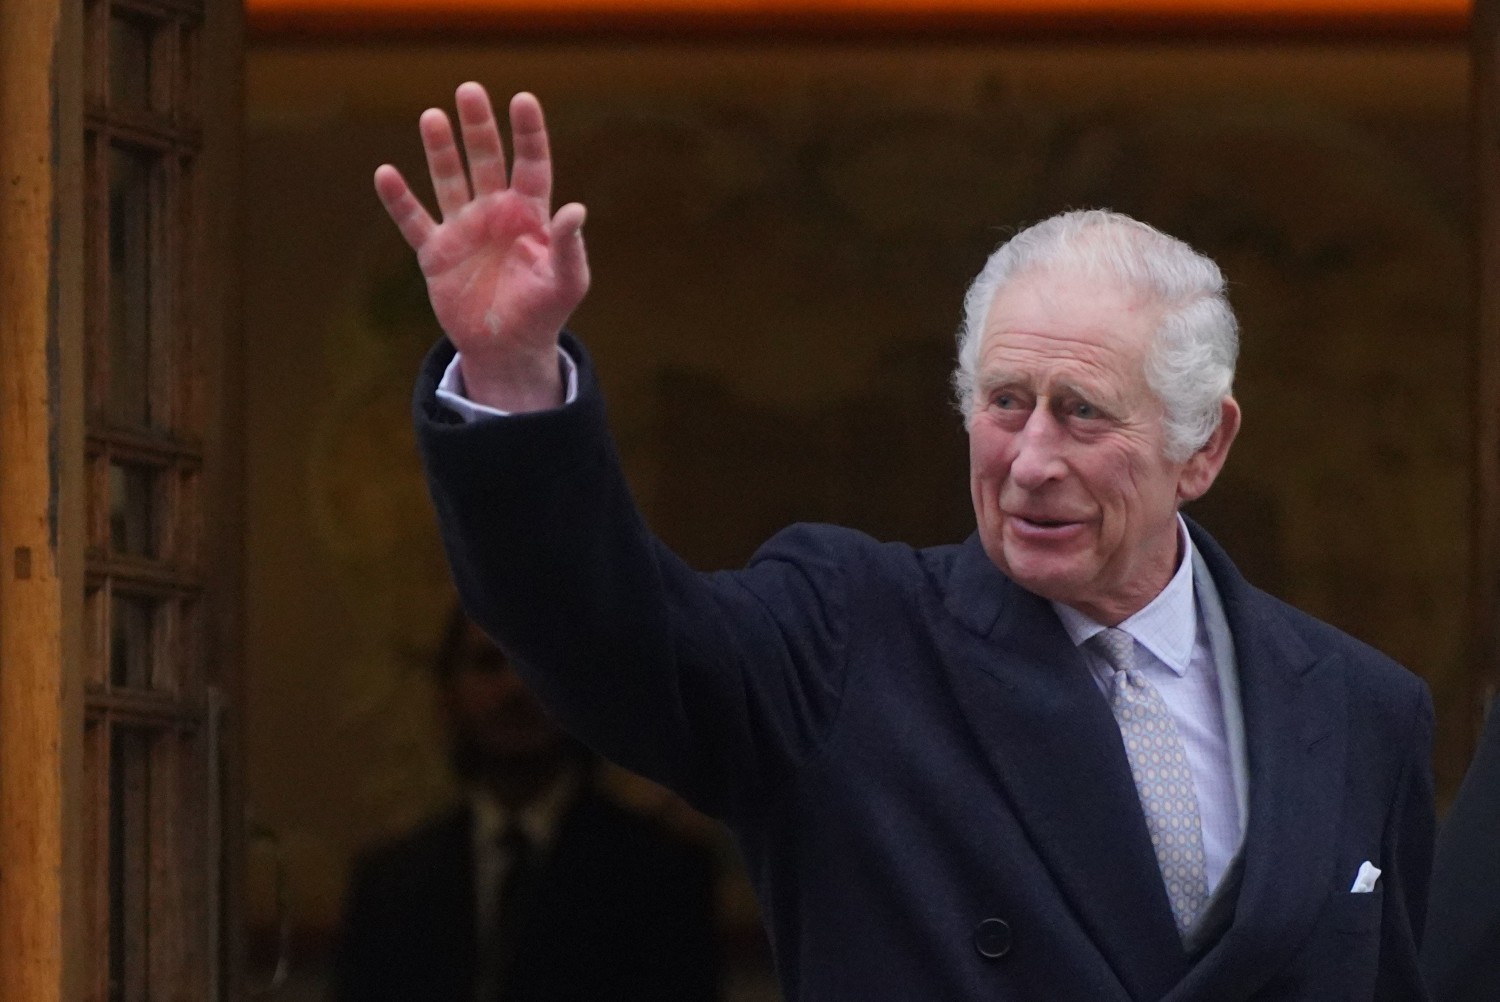 King Charles has been diagnosed with cancer and will be stepping back from his royal duties (PA)